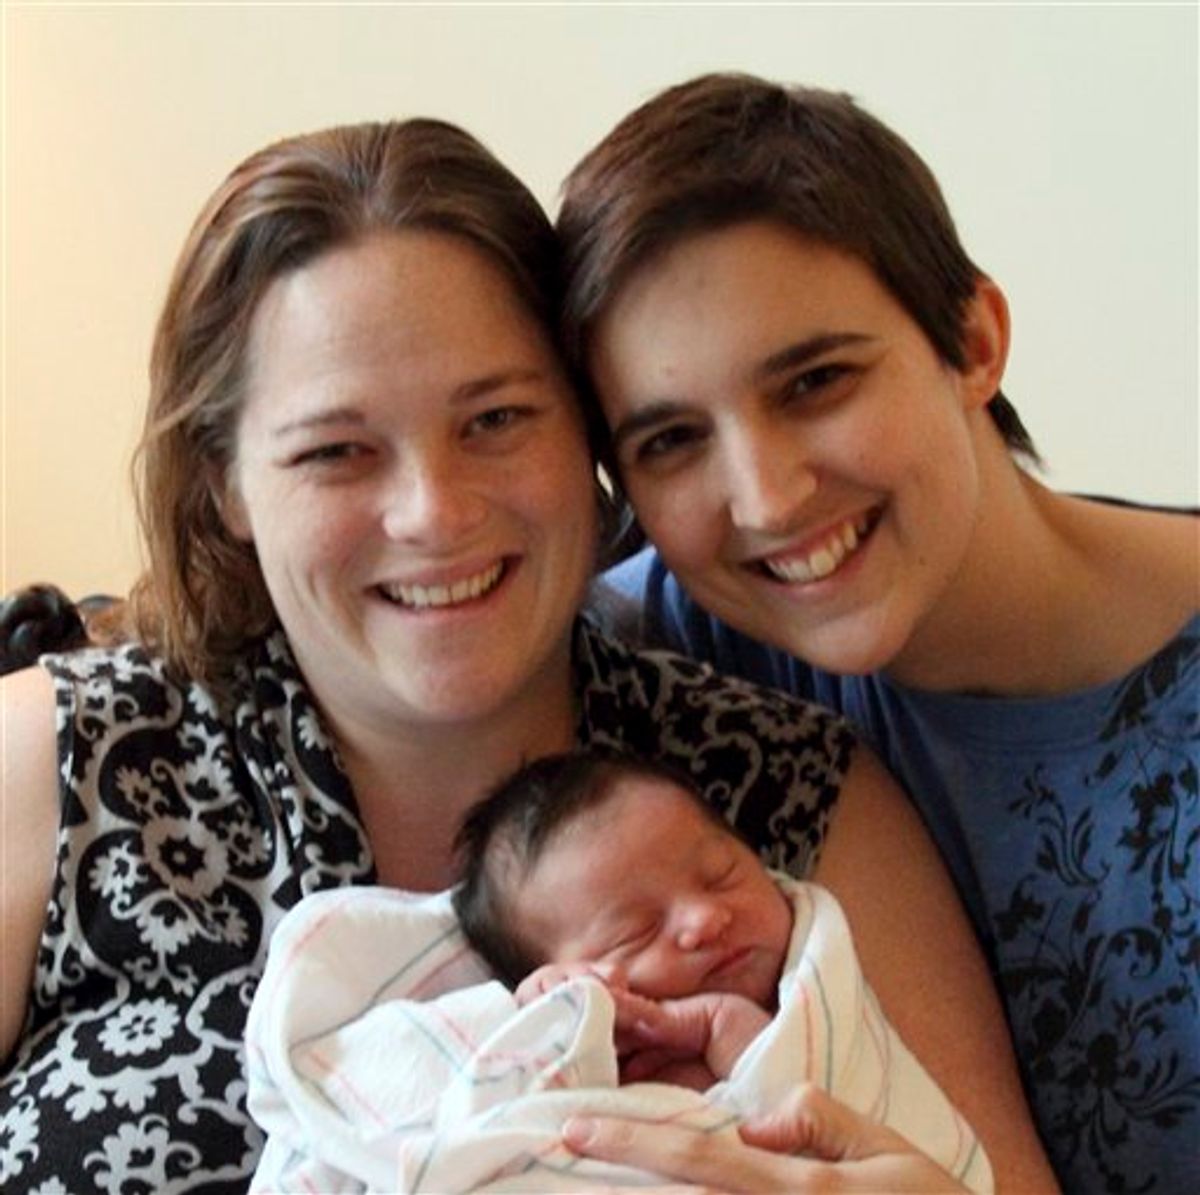 This undated photo provided by Heather Kraft shows, from left to right, Heather, baby Esther Kraft and Kathryn Kraft of Newton, Mass. Heather and Kathryn had a church wedding five years ago in white gowns and 10 bridesmaids after obtaining a marriage license under their state's gay marriage law.  The couple chose to use Kathryn's Kraft as their last name and Heather's Cole as the middle name for the entire family.  (AP Photo/Heather Kraft)   NO SALES  (AP)